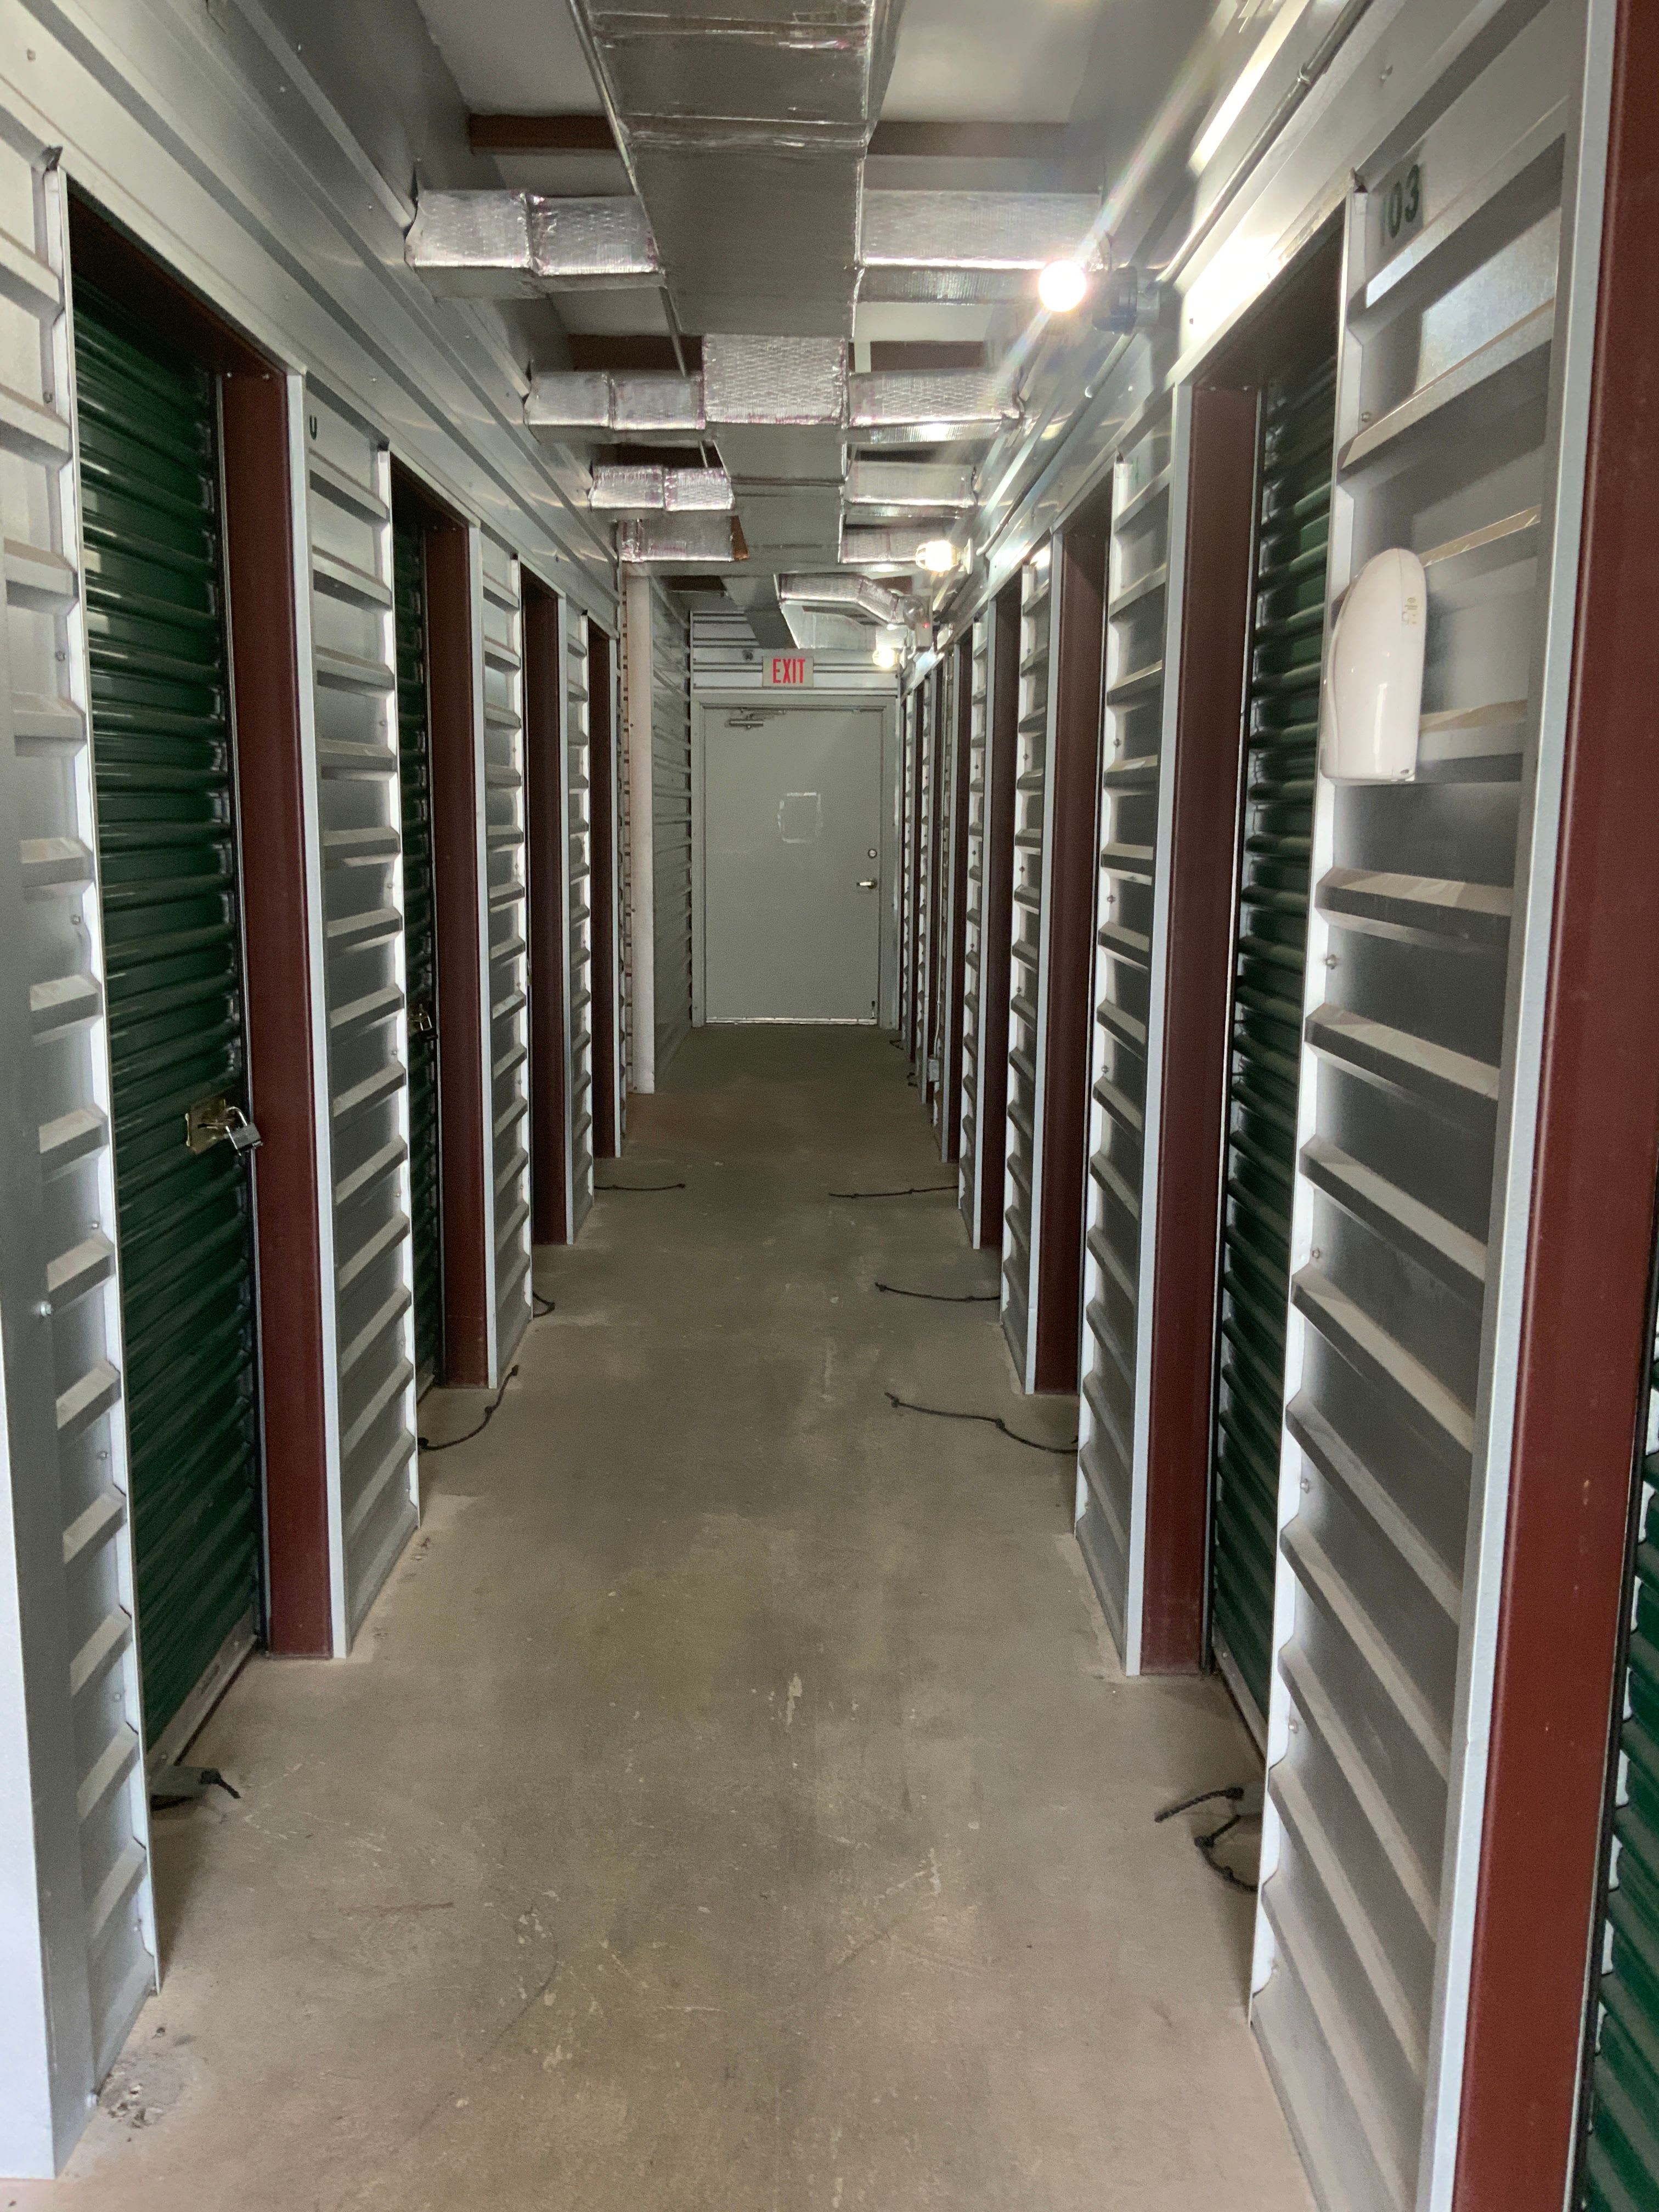 Learn more about auto storage at KO Storage in Harlingen, Texas